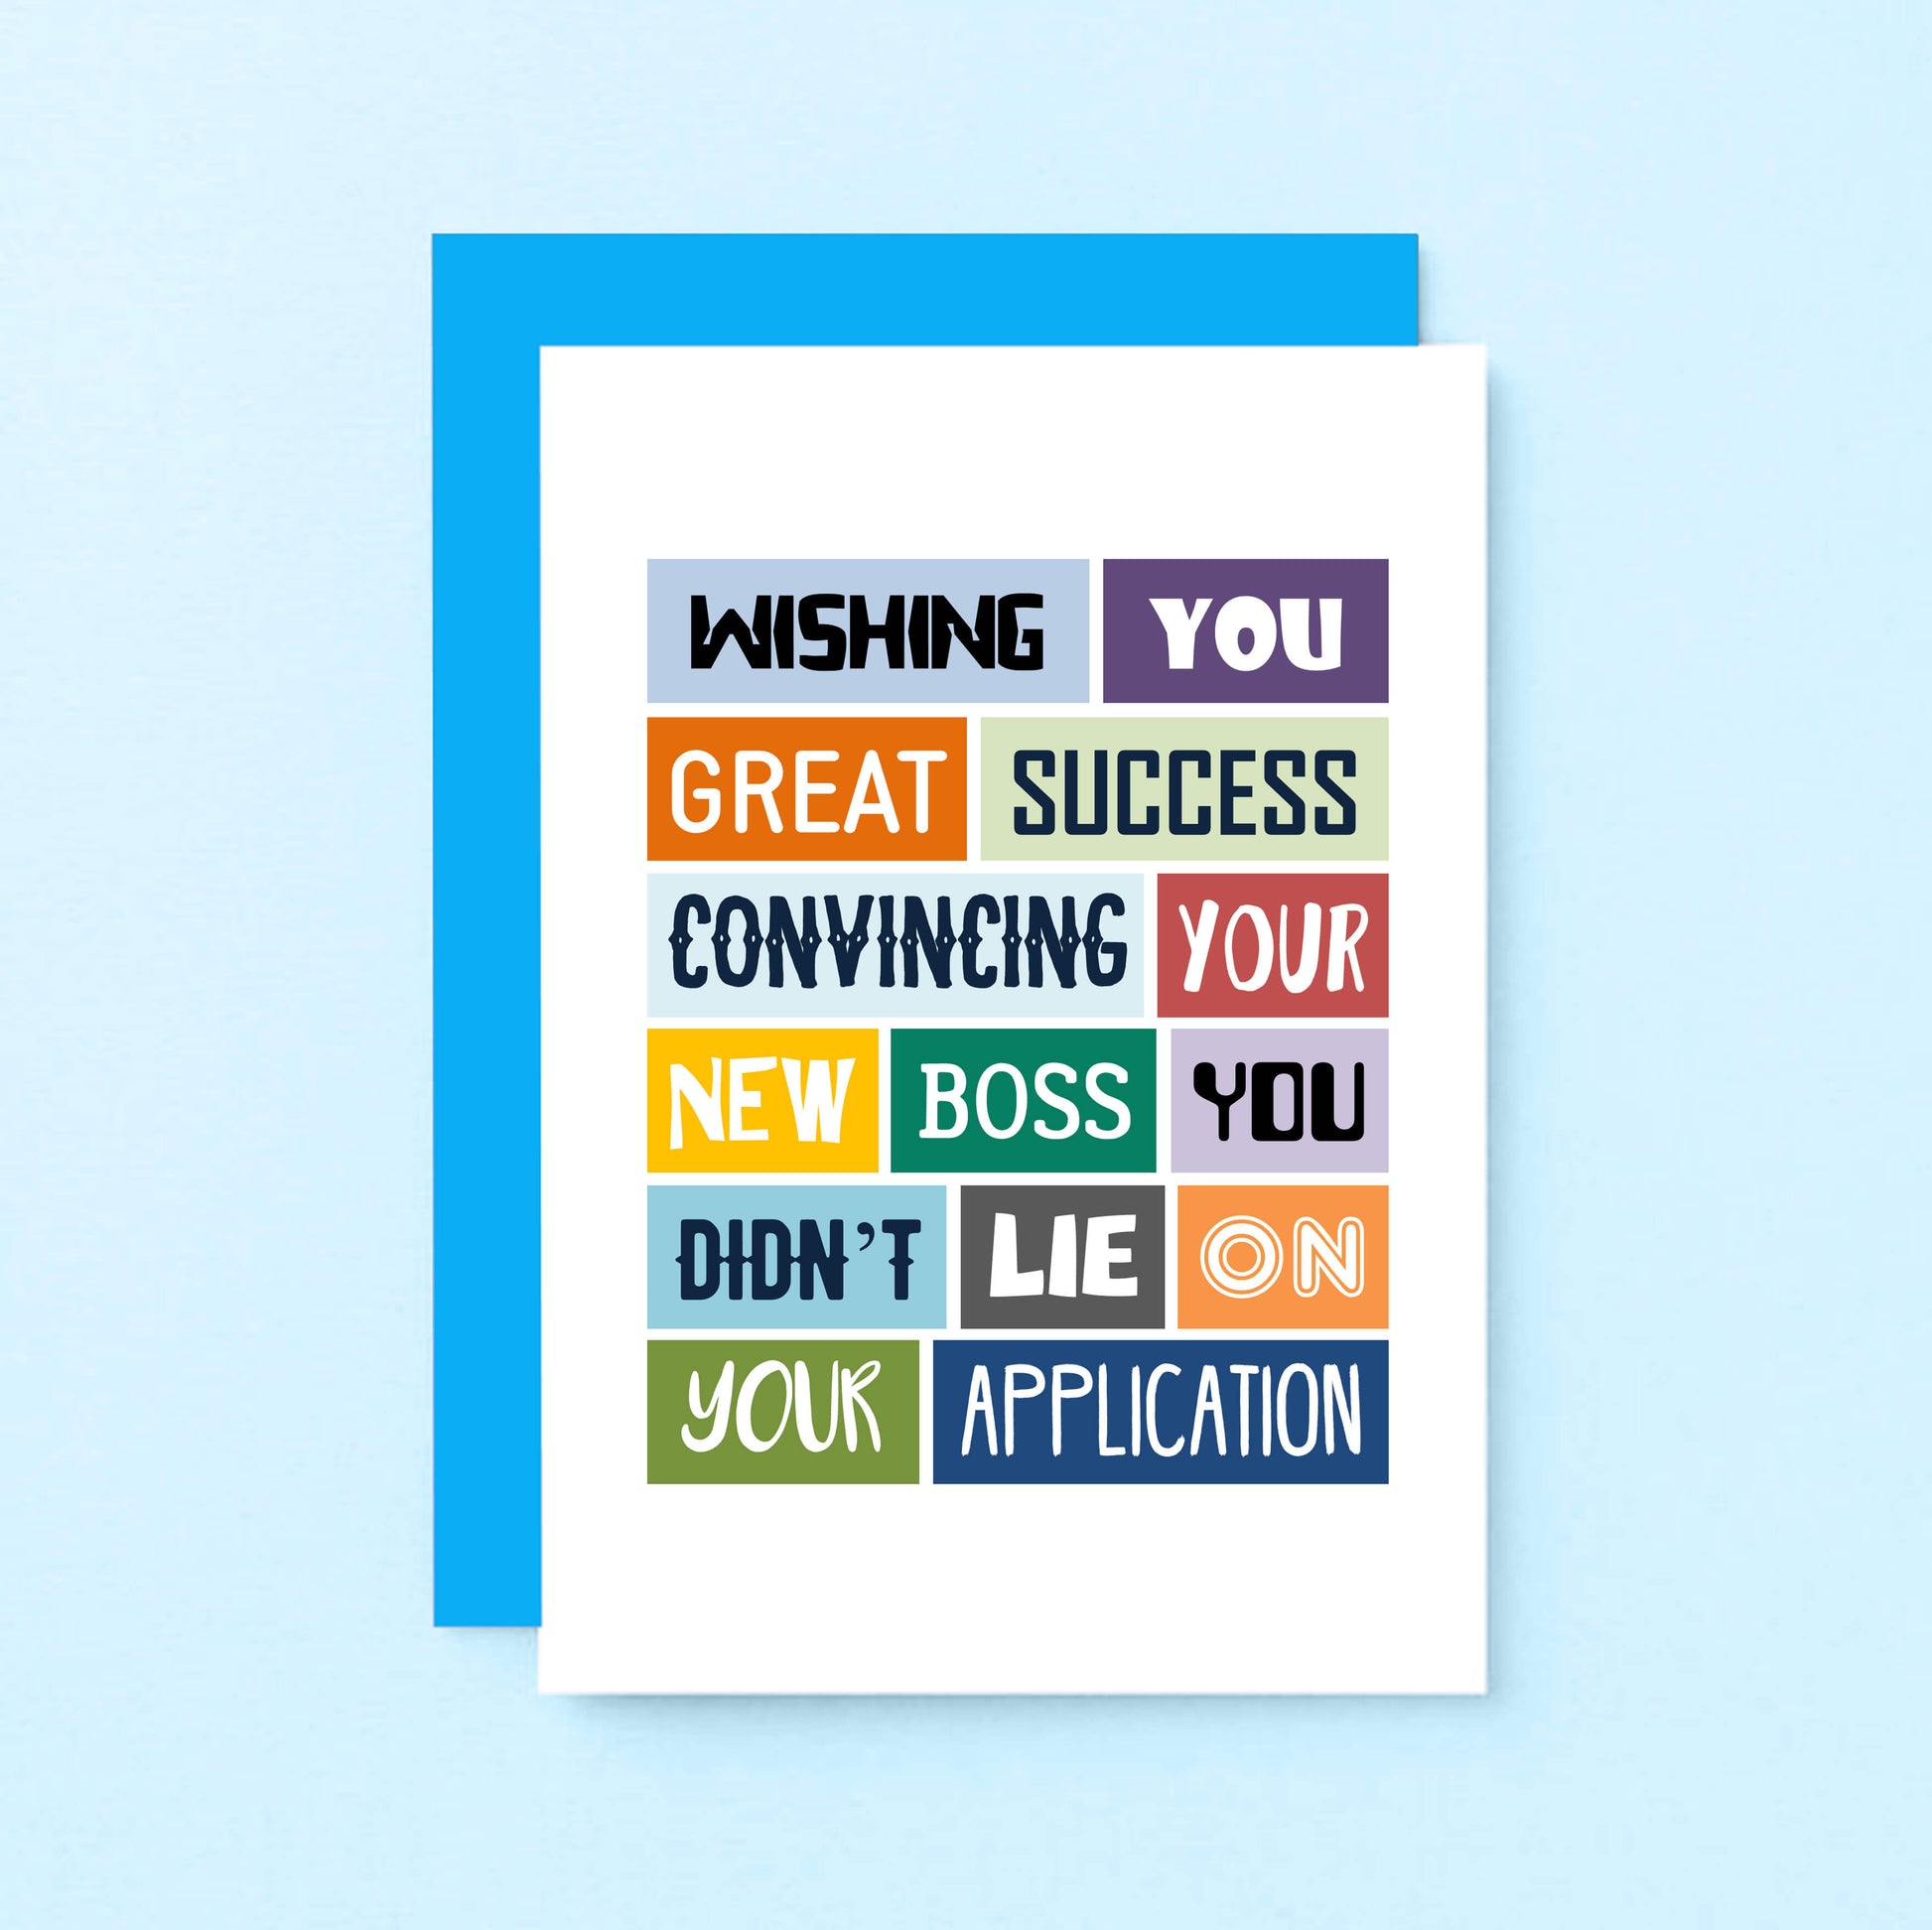 Funny New Job Card by SixElevenCreations. Reads Wishing you great success convincing your new boss you didn't lie on your application. Product code SE0021A6